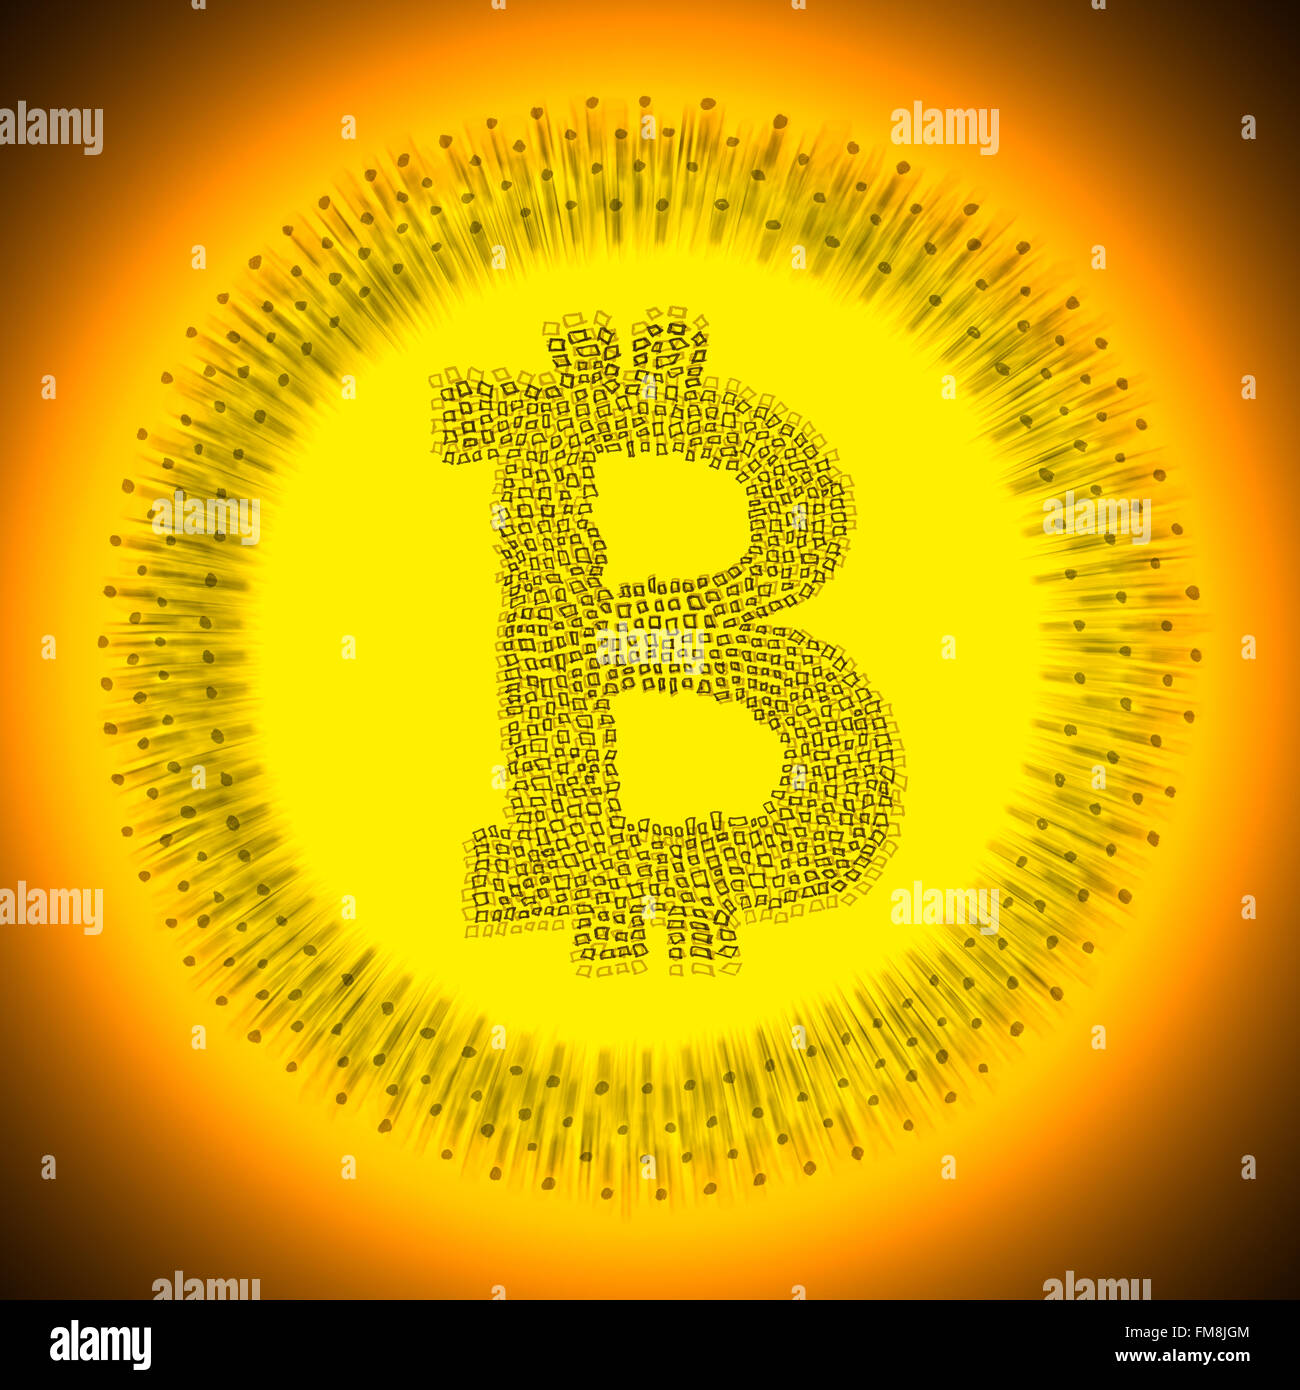 Digital gold Bitcoin illustration. Logo of an electronic decentralized crypto currency coin. Stock Photo